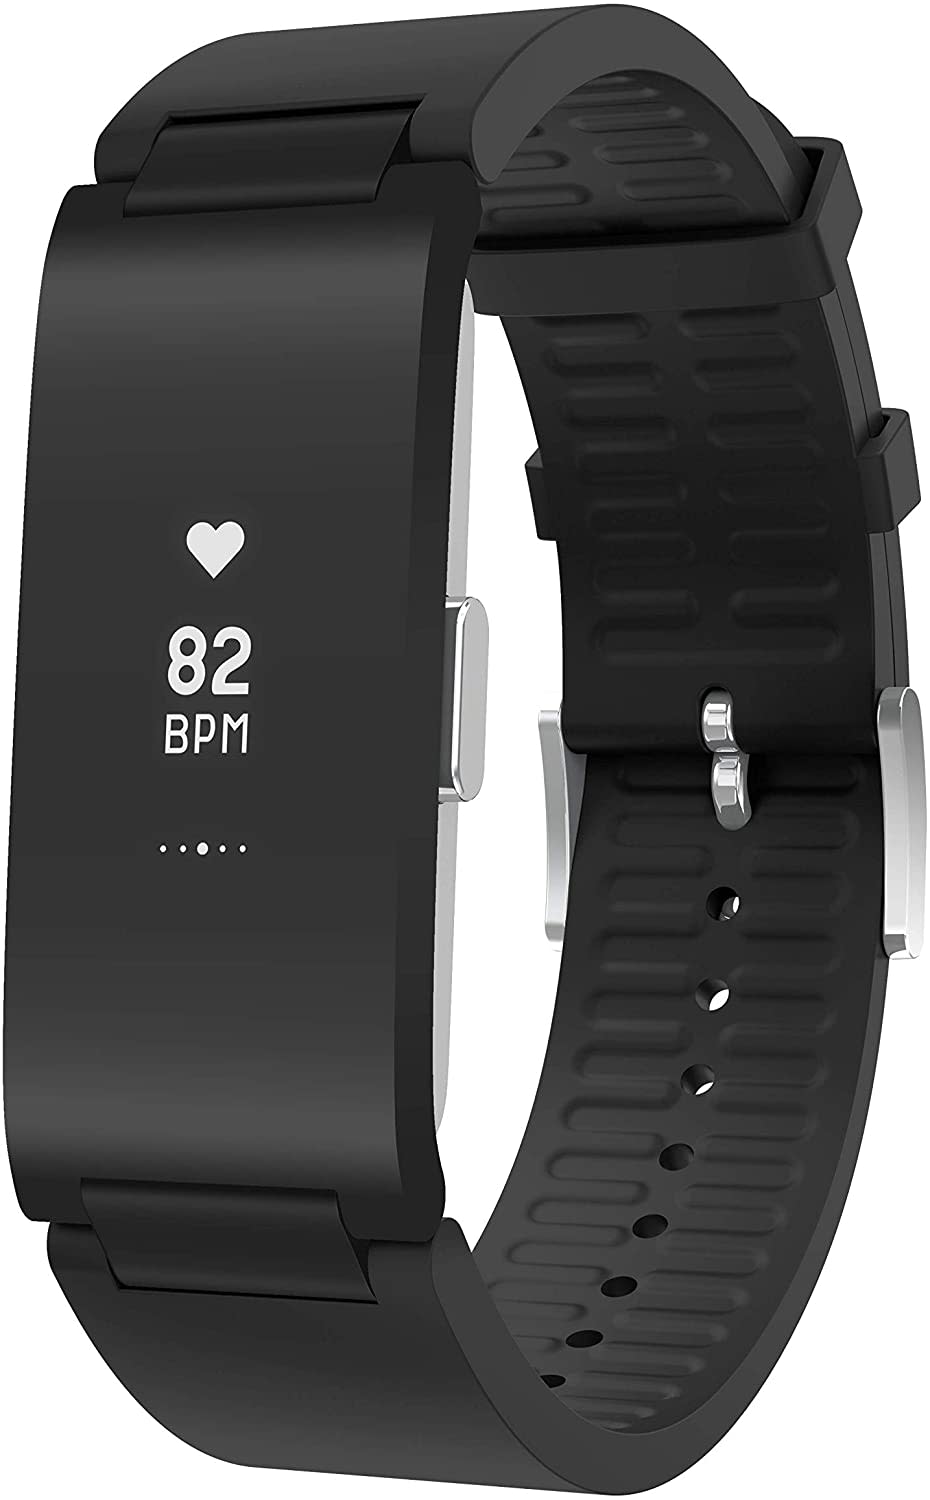 Intrusion legemliggøre Snavs Withings Pulse HR Water Resistant Health & Fitness Tracker | Optum Store